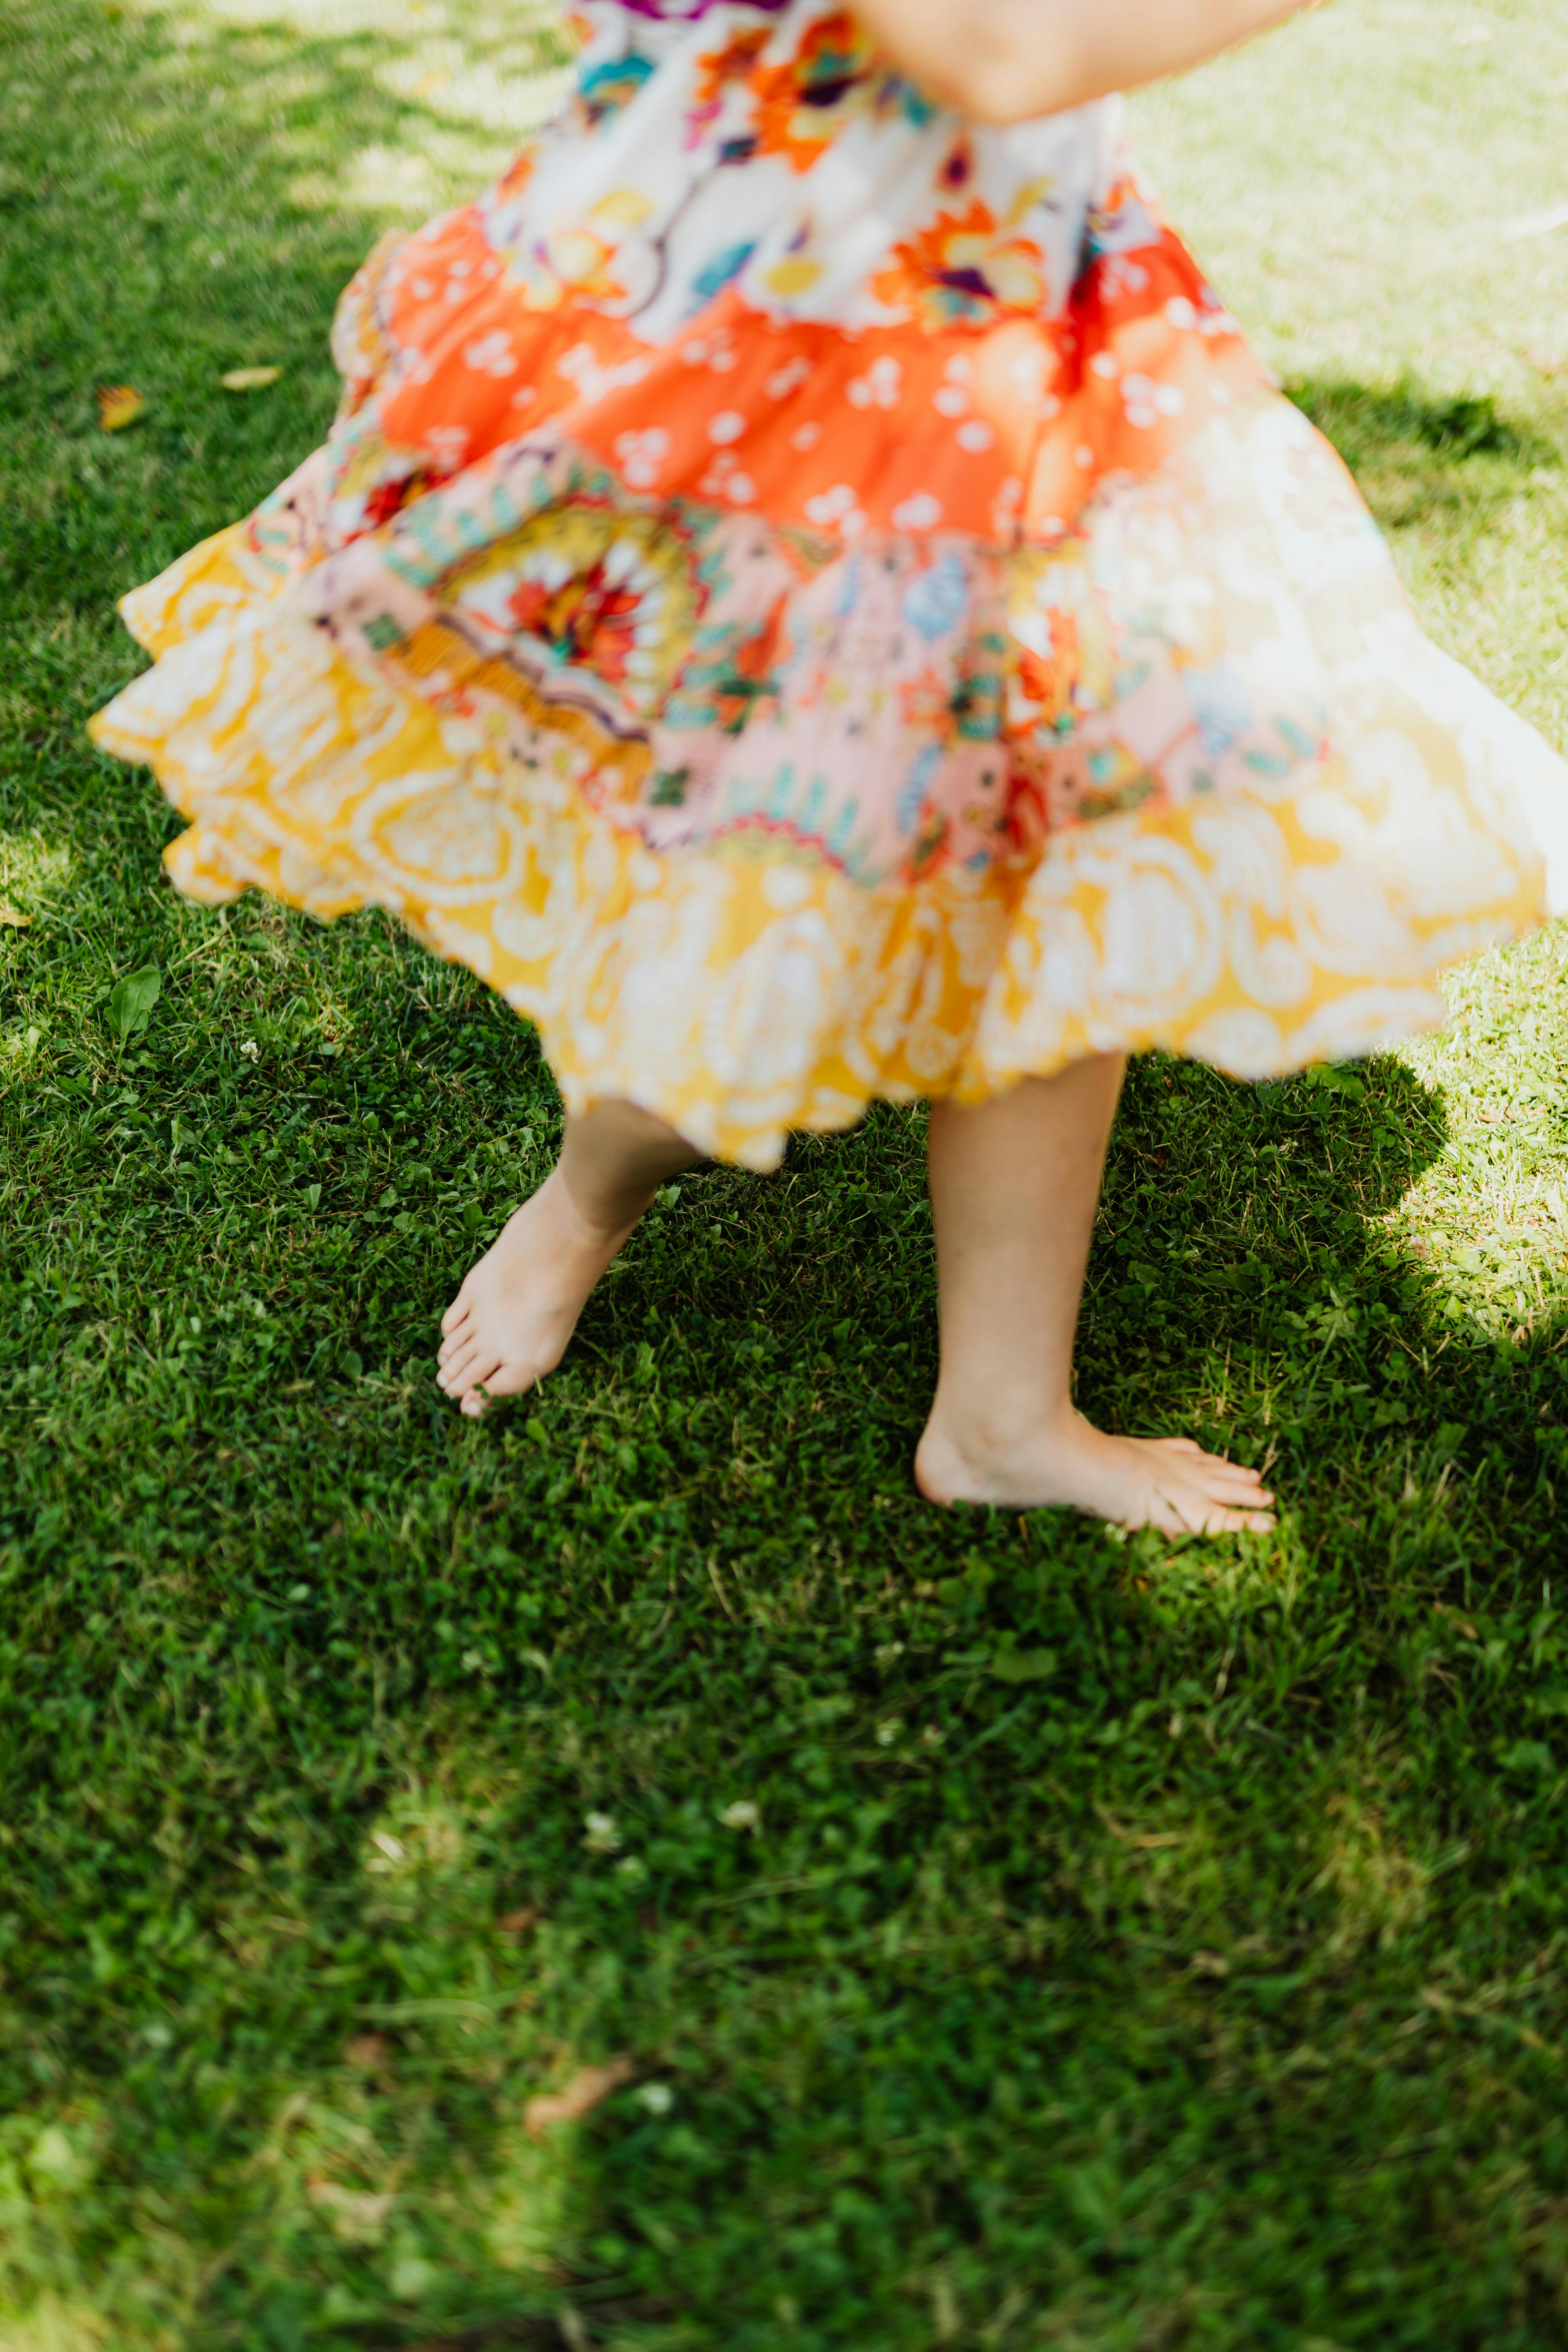 person wearing dress standing on grass